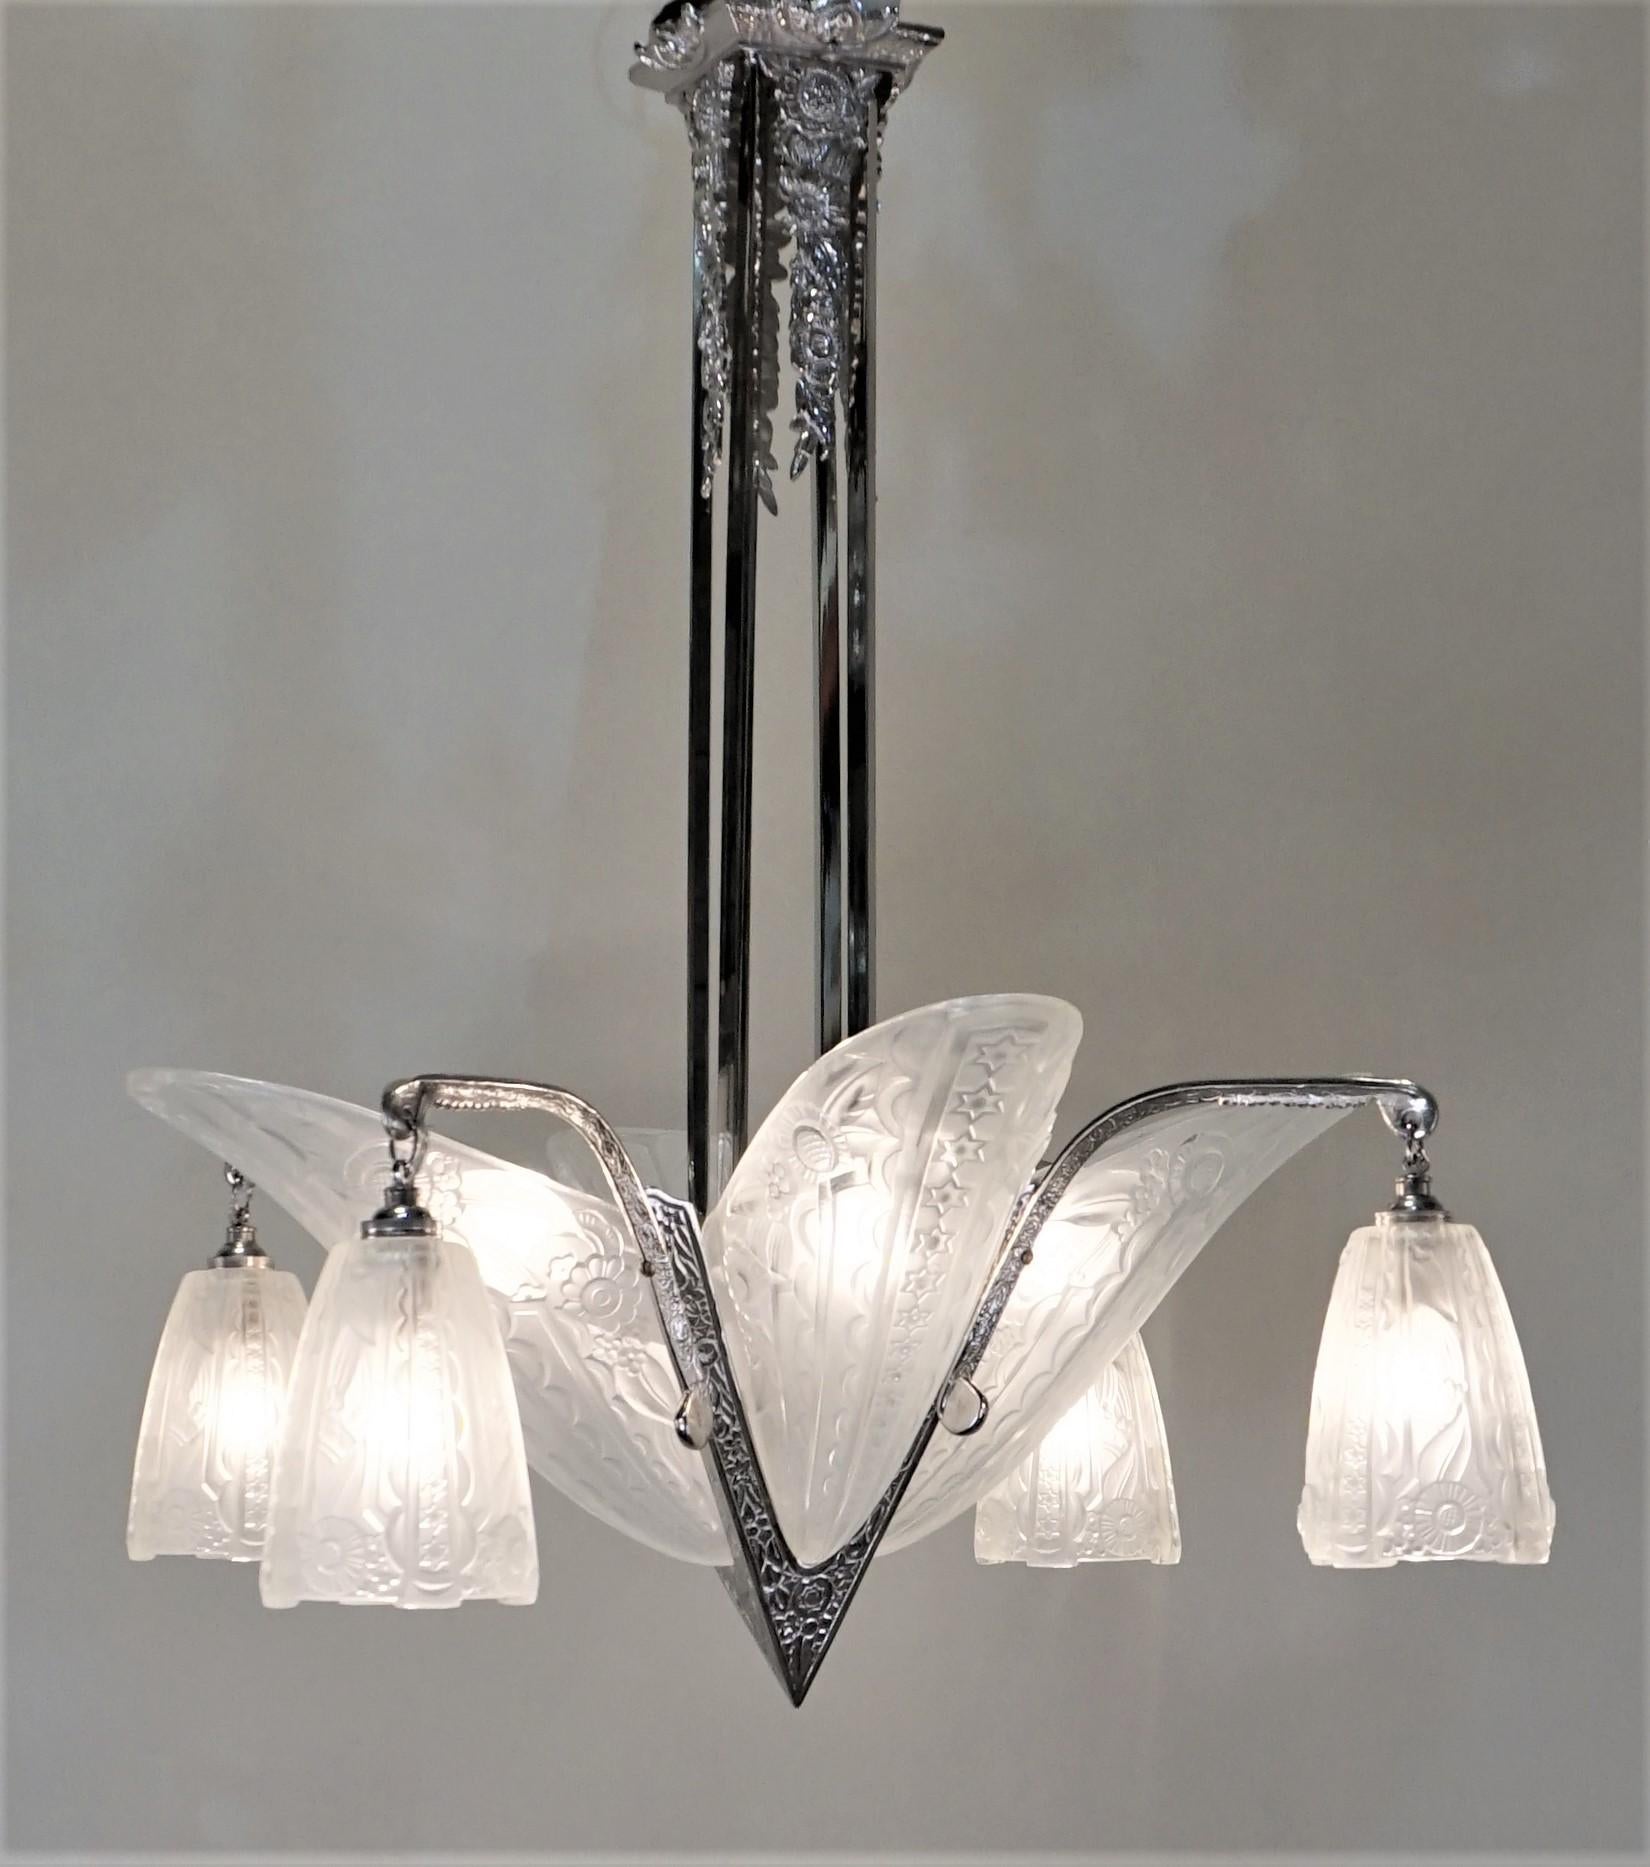 French 1930 Art Deco chandelier in beautiful design nickel on bronze frame and clear frost glass shades.
Eight lights 60 watt each.